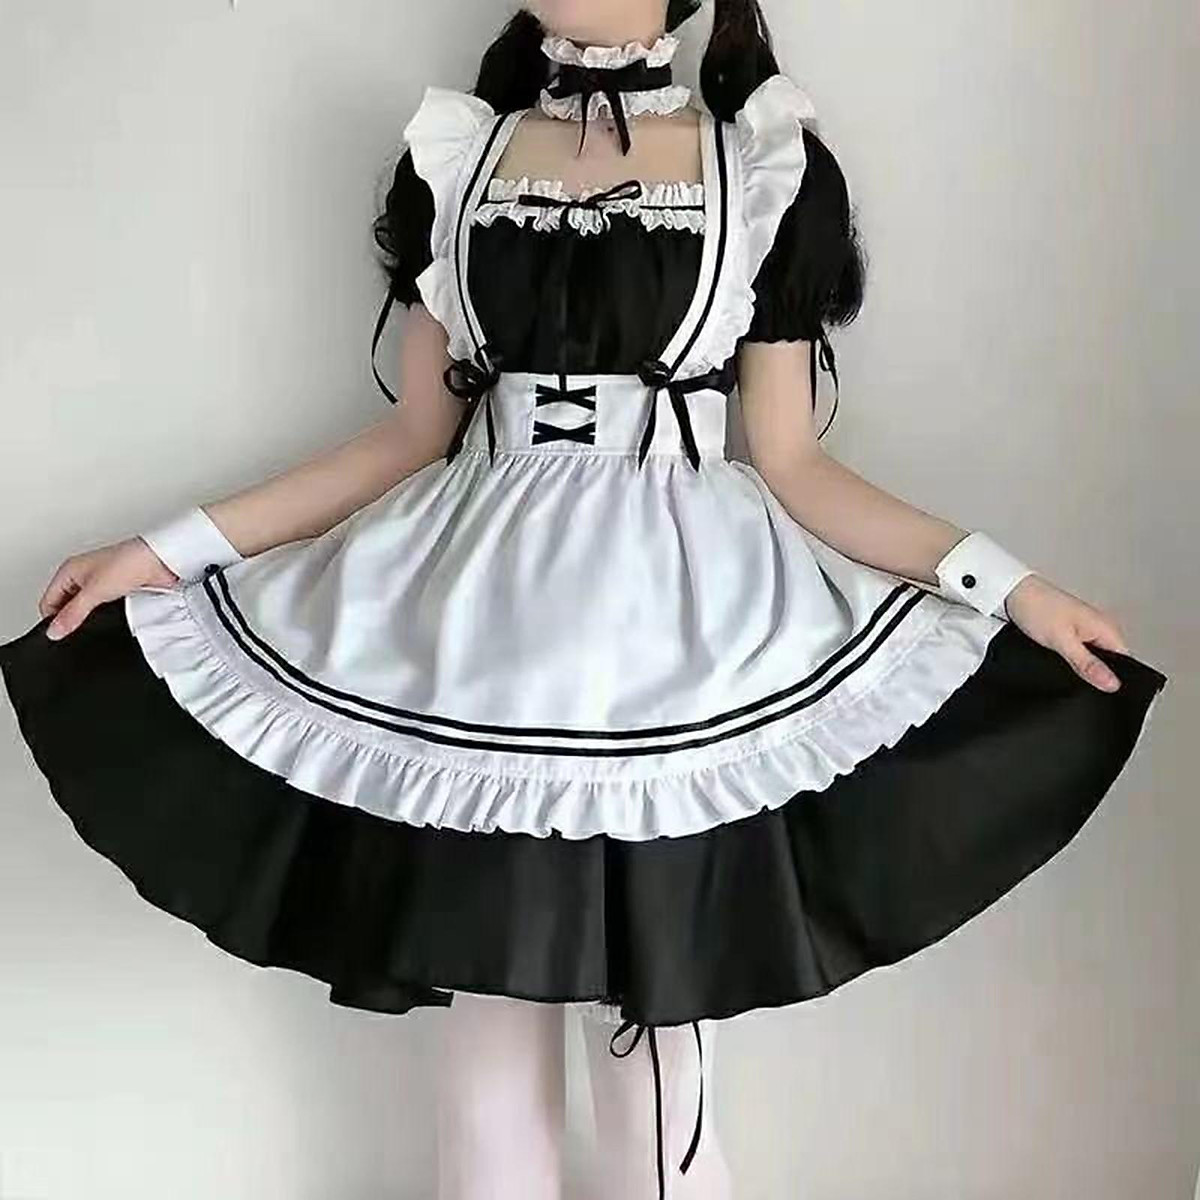 Introducir 88+ imagen maid outfit